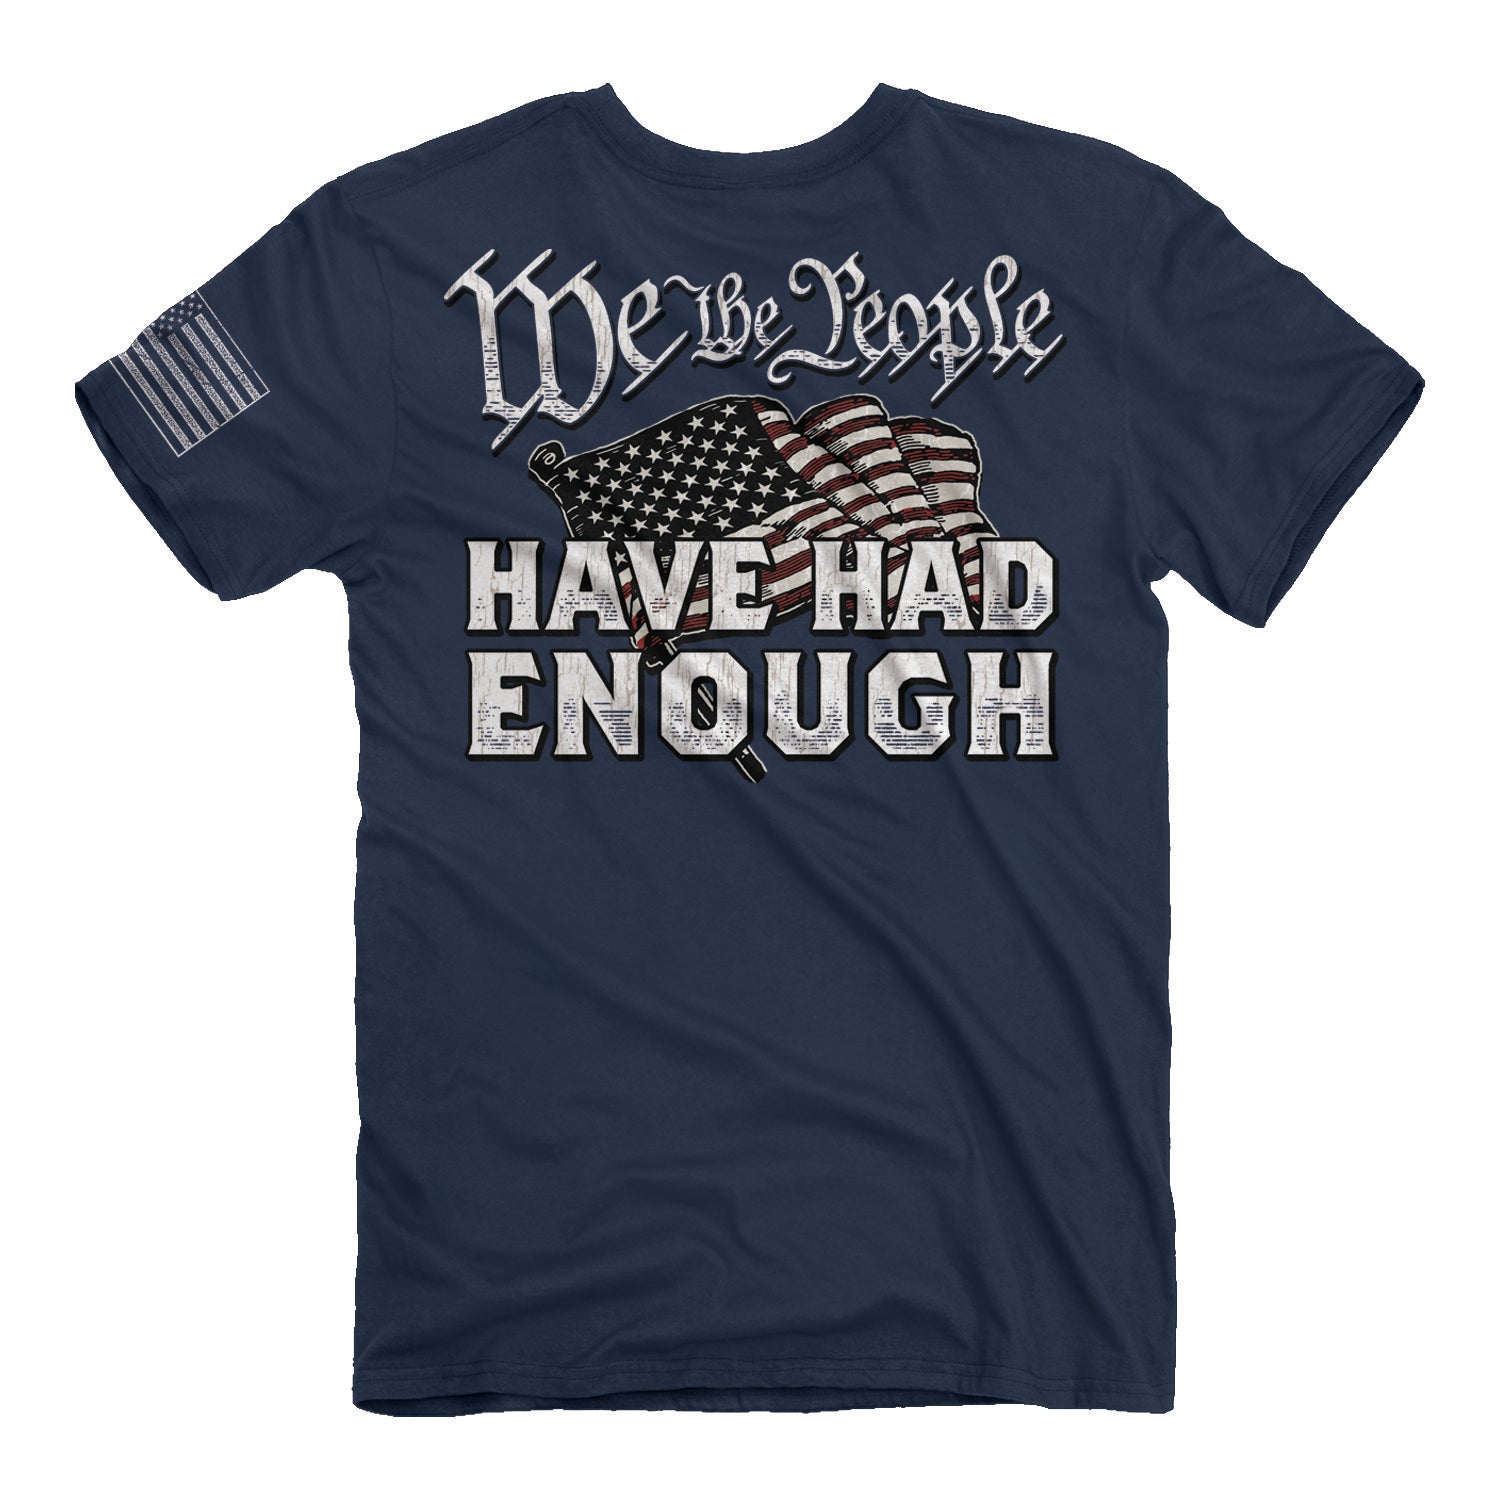 Buck Wear 2164 Men's We The People Have Had Enough T-ShirtBuck Wear 2164 Men's We The People Have Had Enough T-Shirt Back View